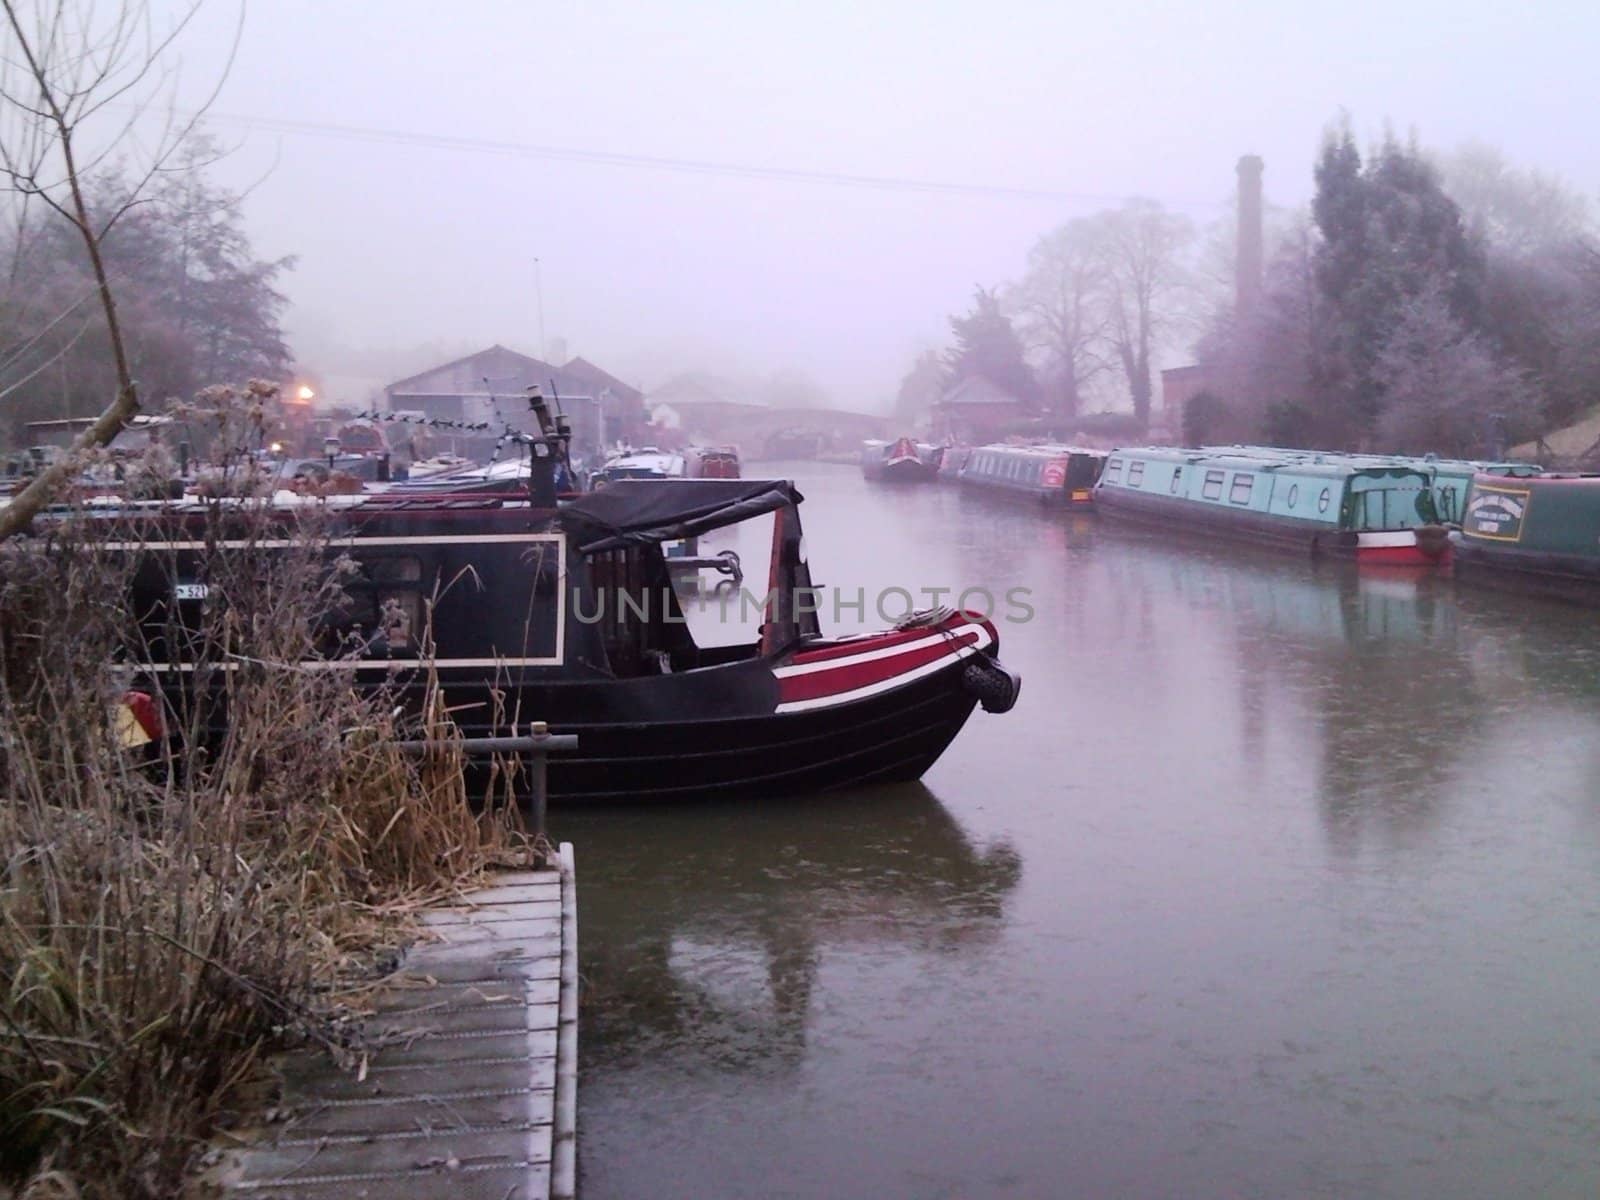 A canal boat on a frozen canal at Braunston, Northamptonshire